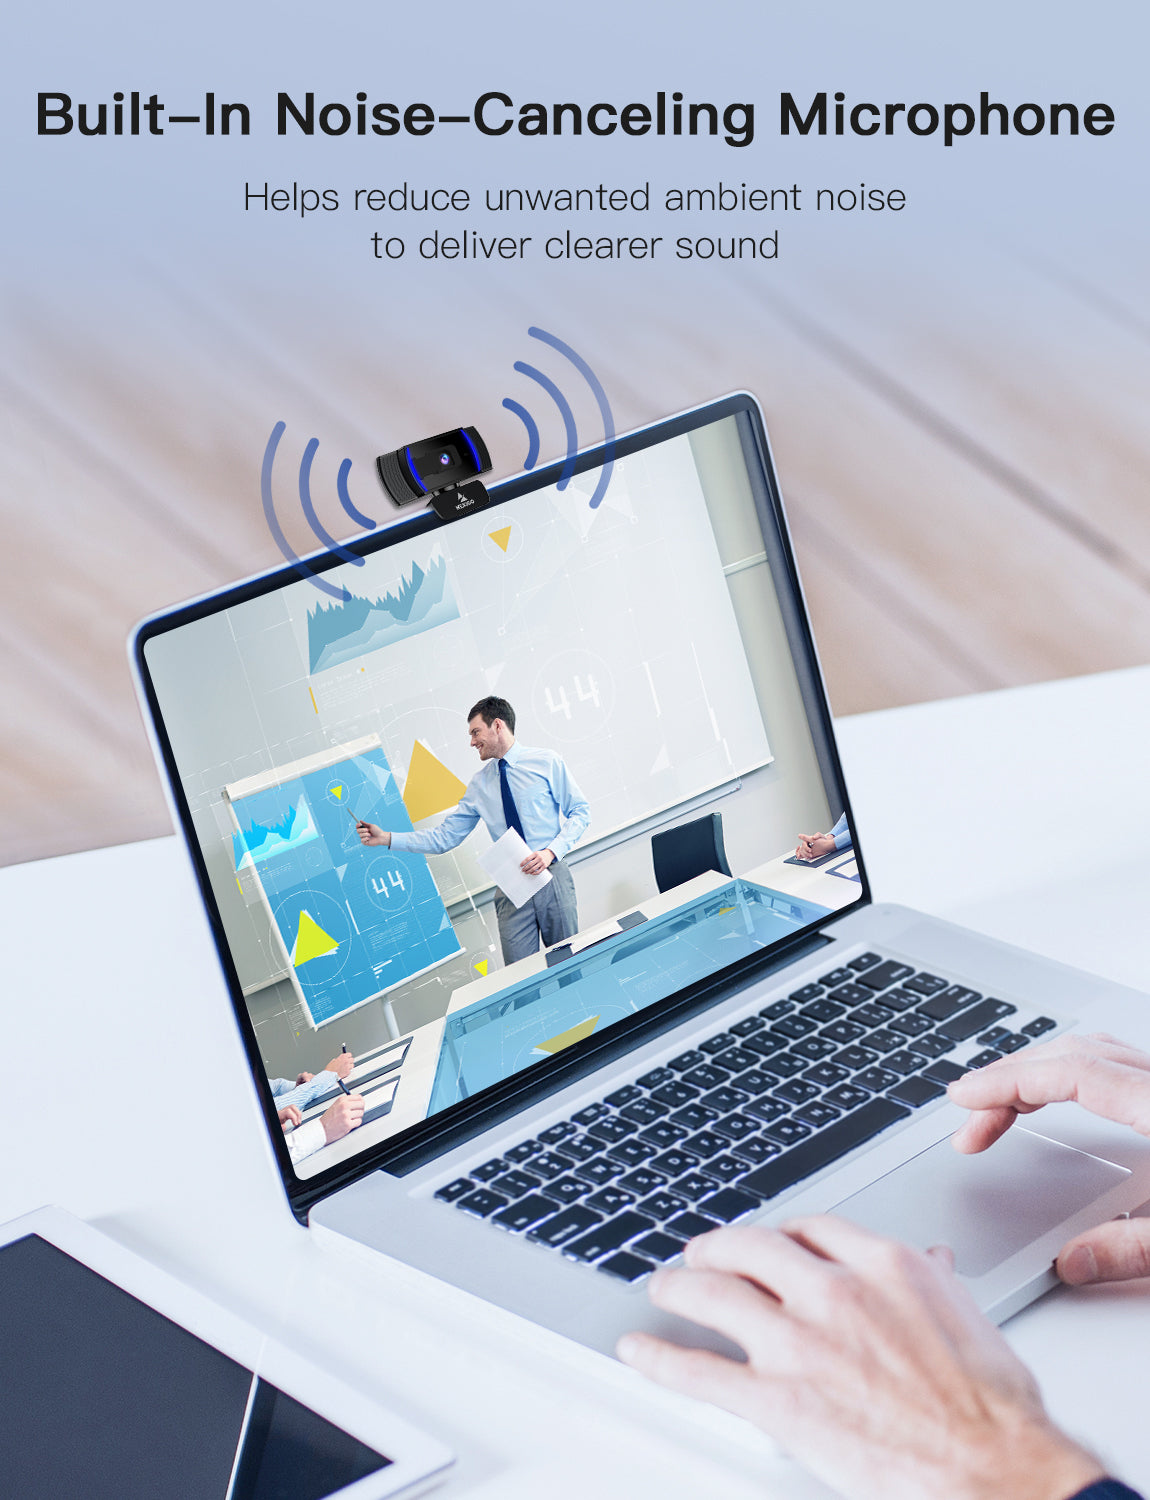 Webcam with built-in noise-canceling microphone, placed on laptop for clear video conferences.